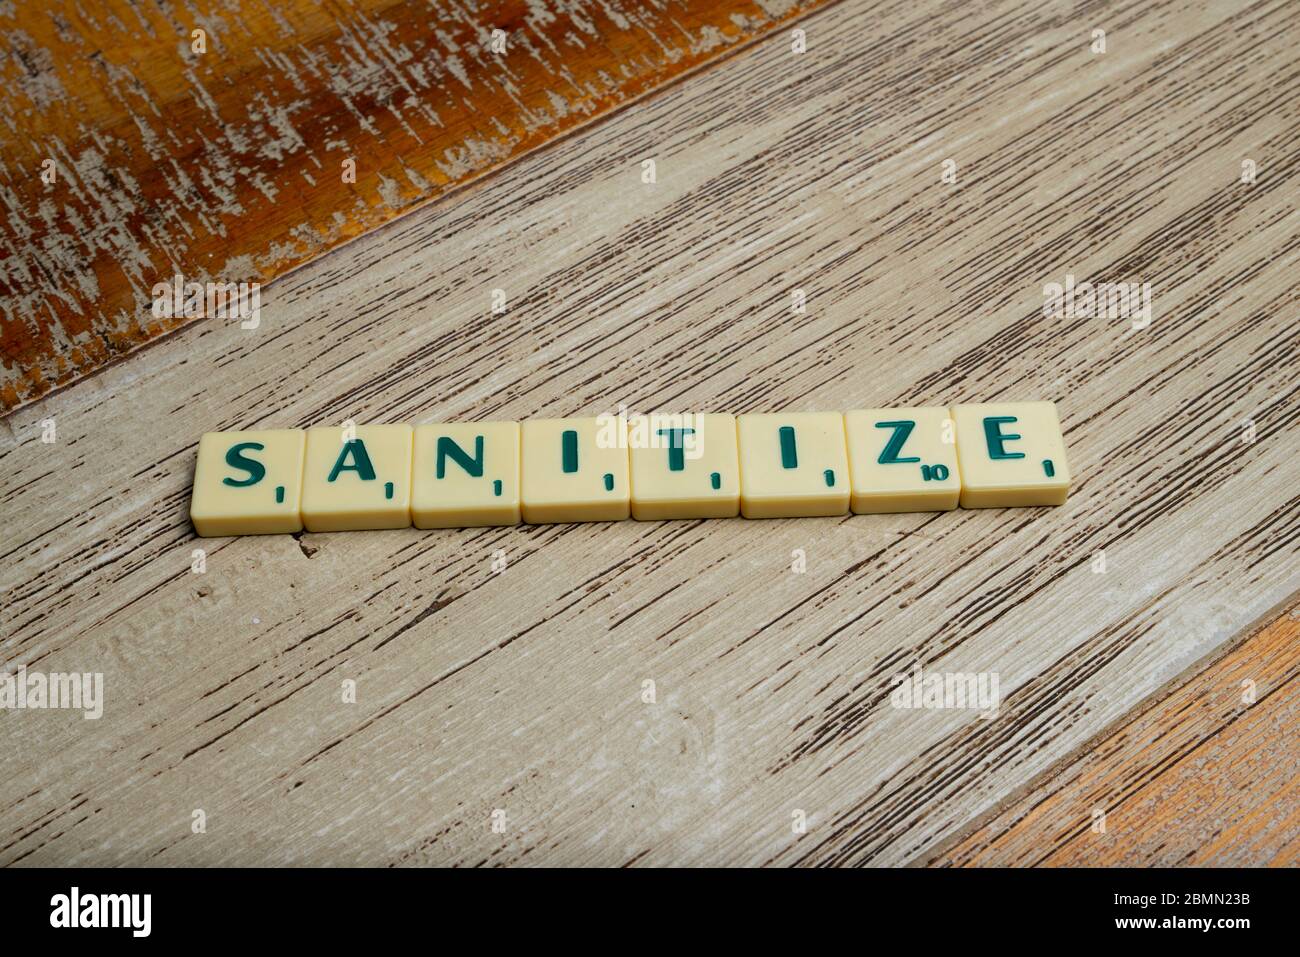 Sanitize flat lay tile letters Stock Photo